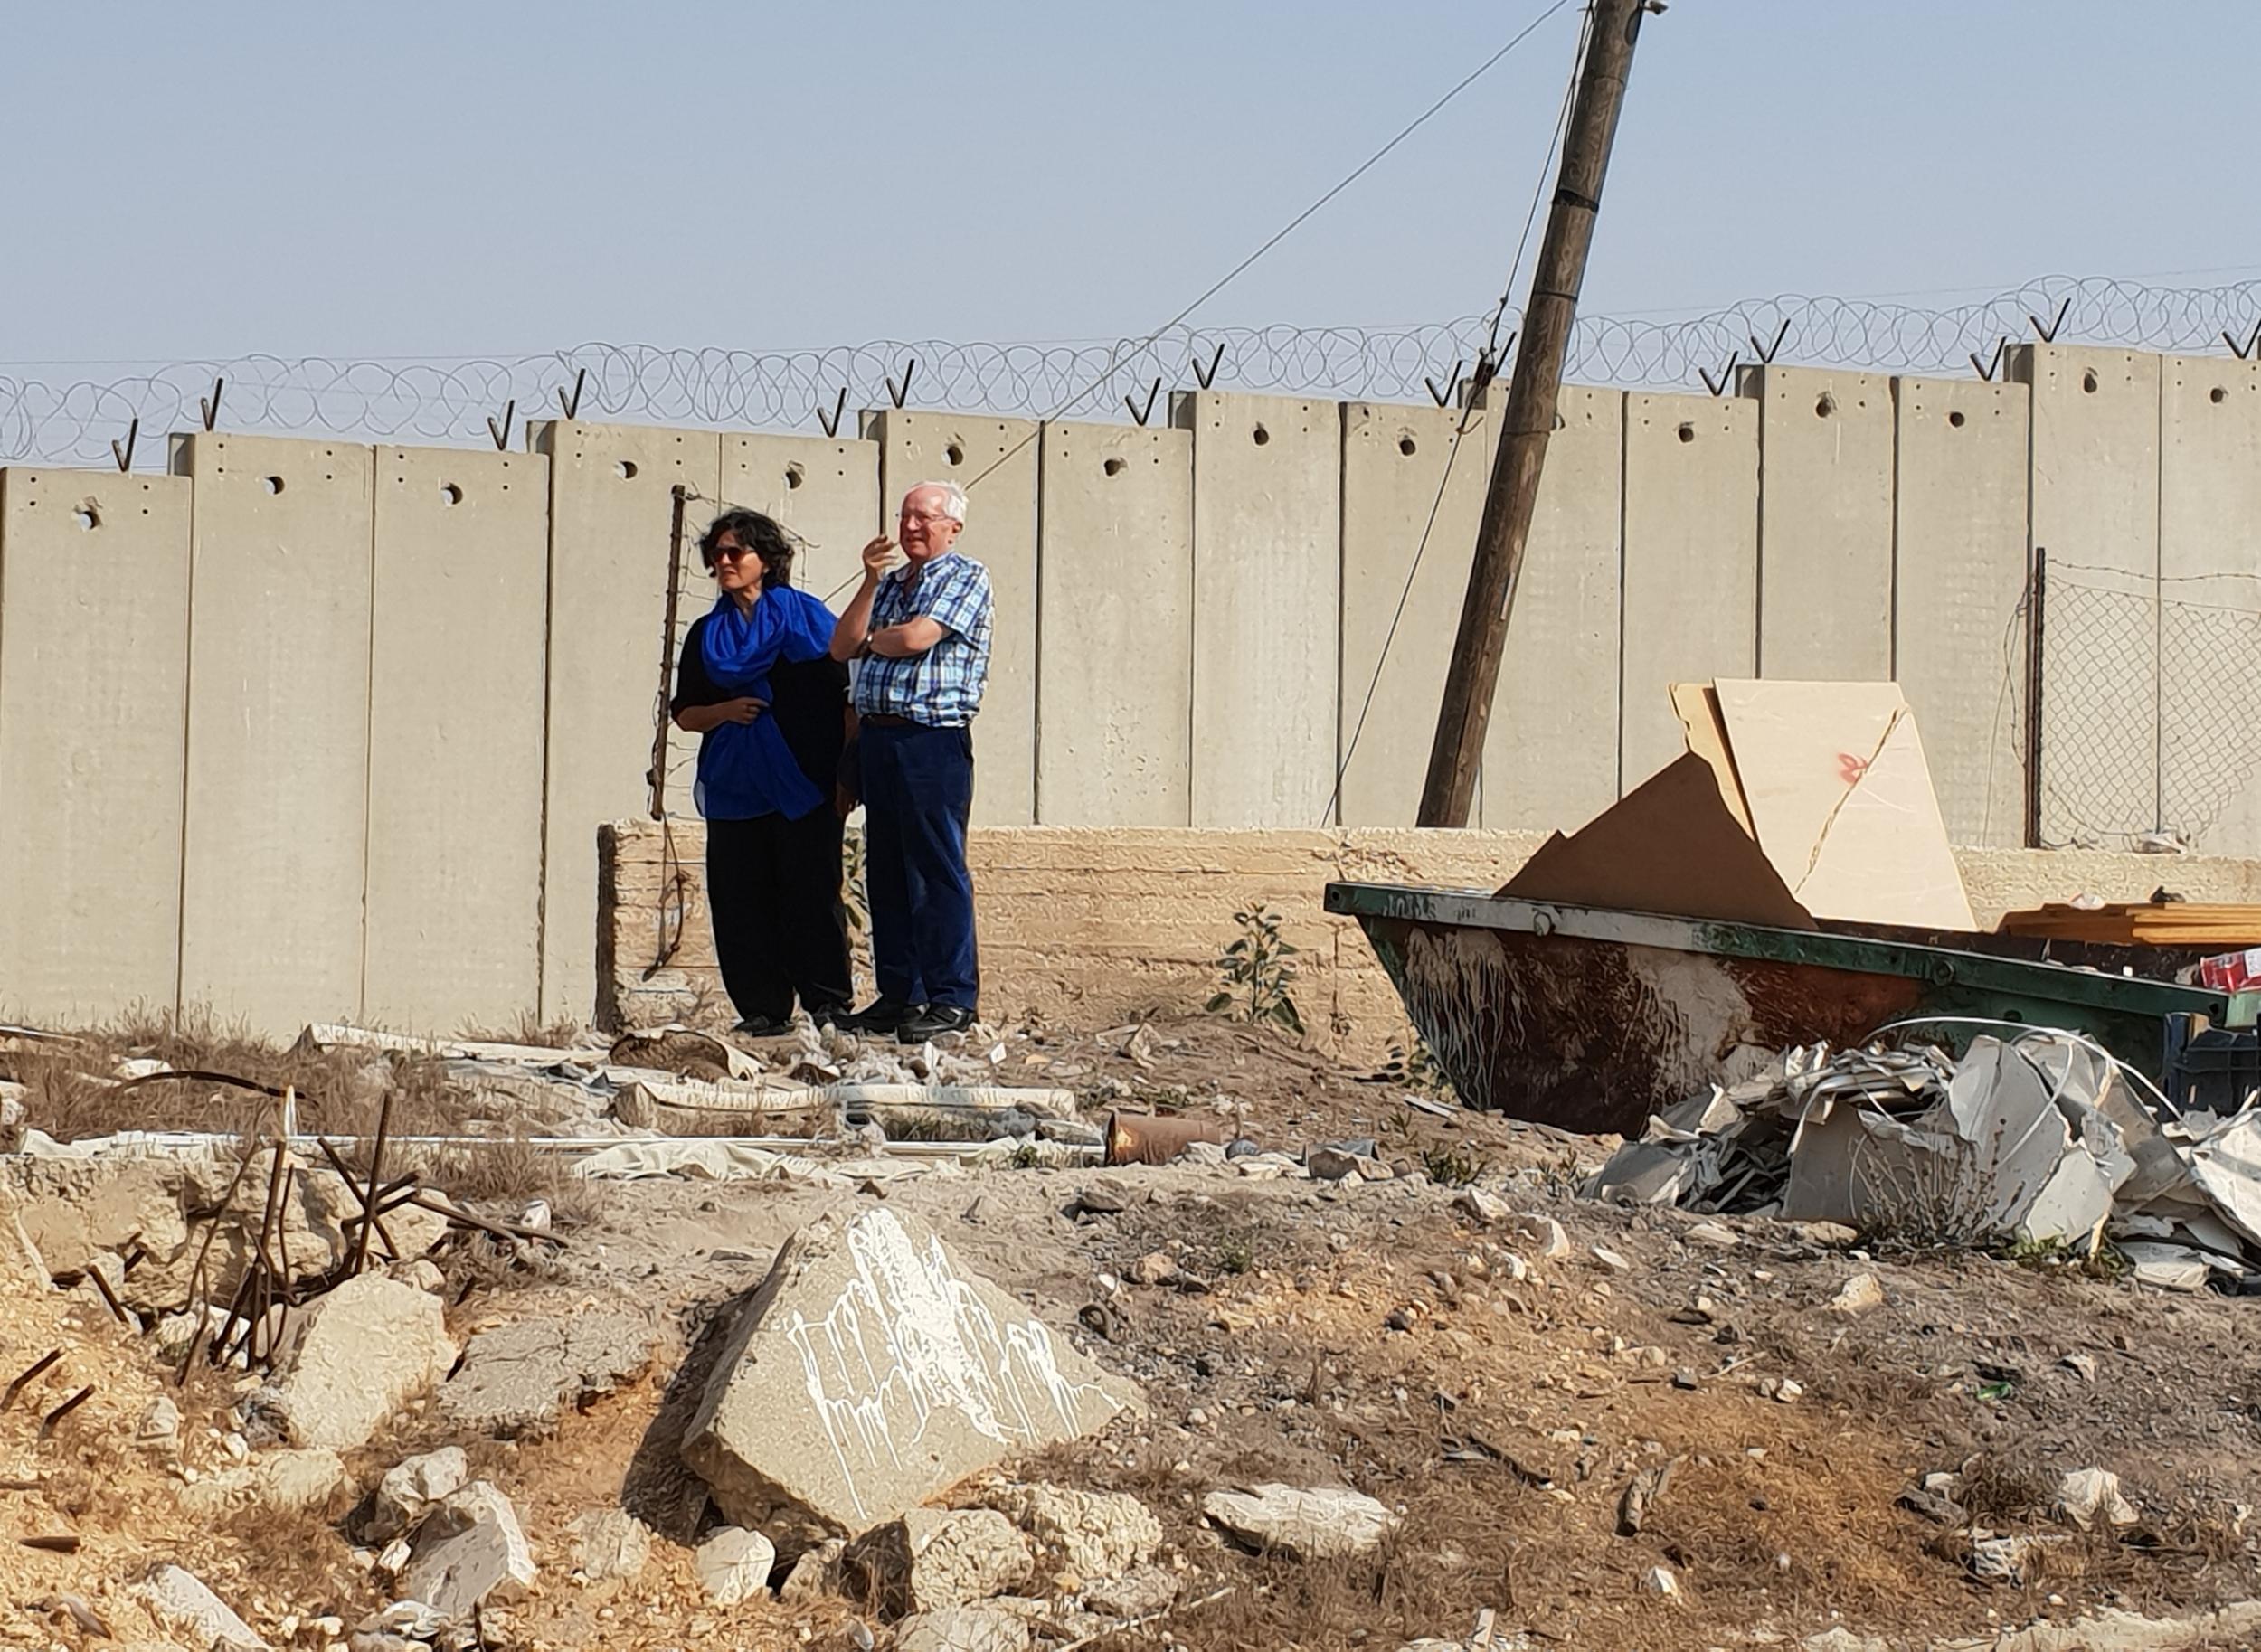 Robert Fisk and Israeli journalist Amira Hass walk alongside a section of 'The Wall' at the West Bank (Nelofer Pazira)